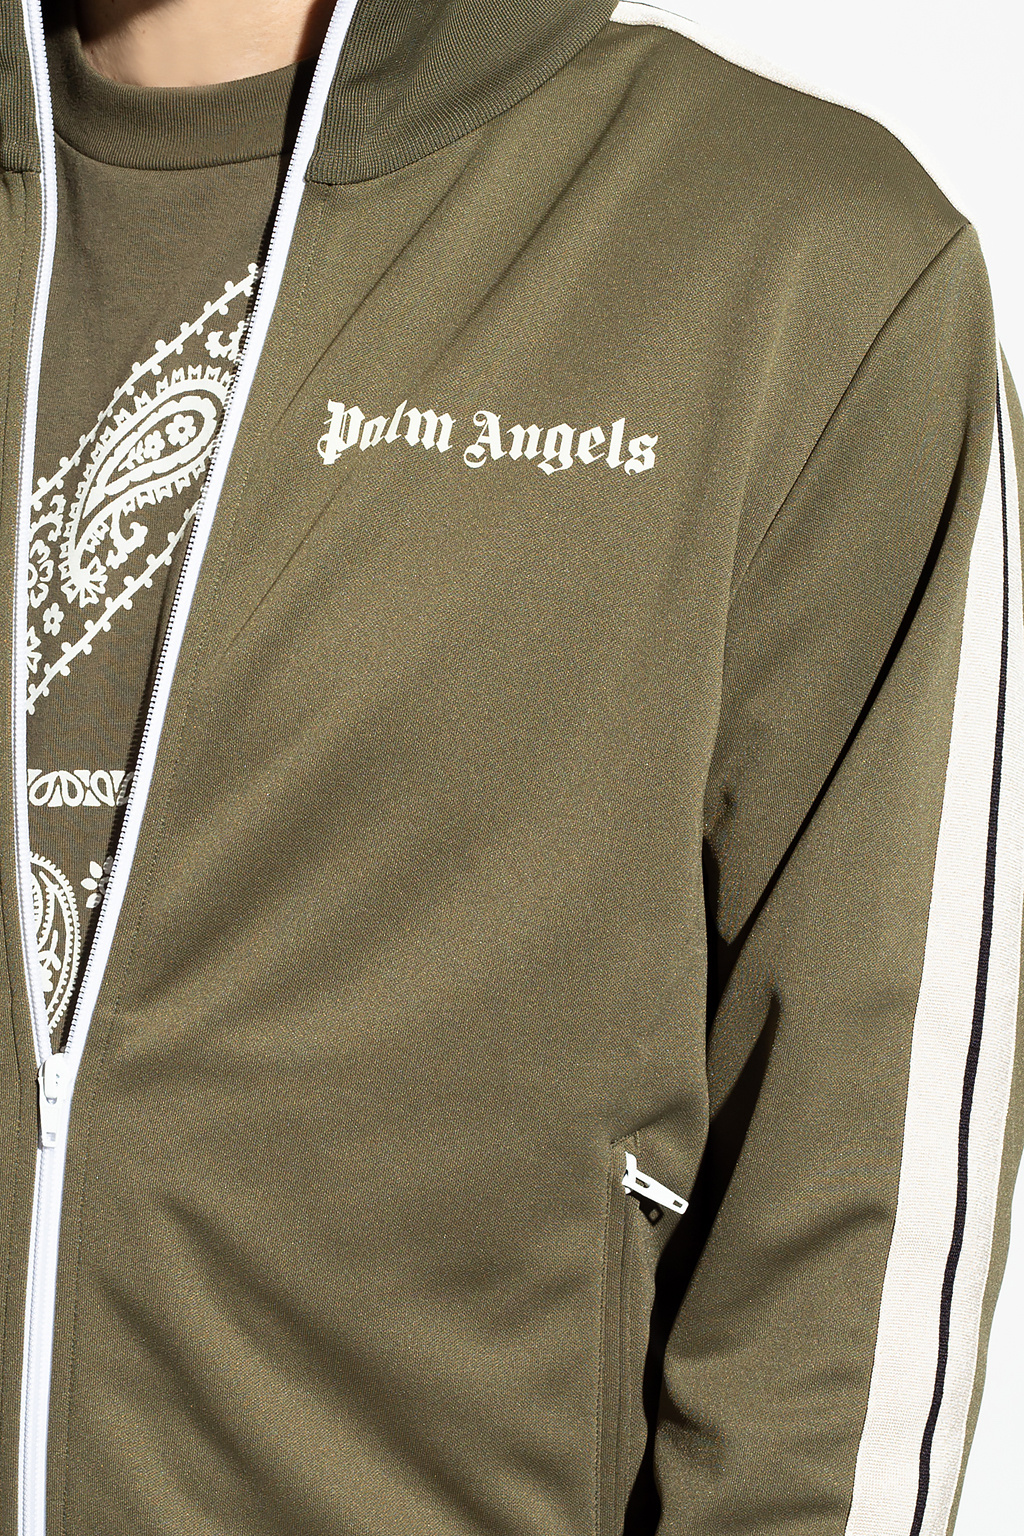 Palm Angels Children's nylon jacket with Gucci logo